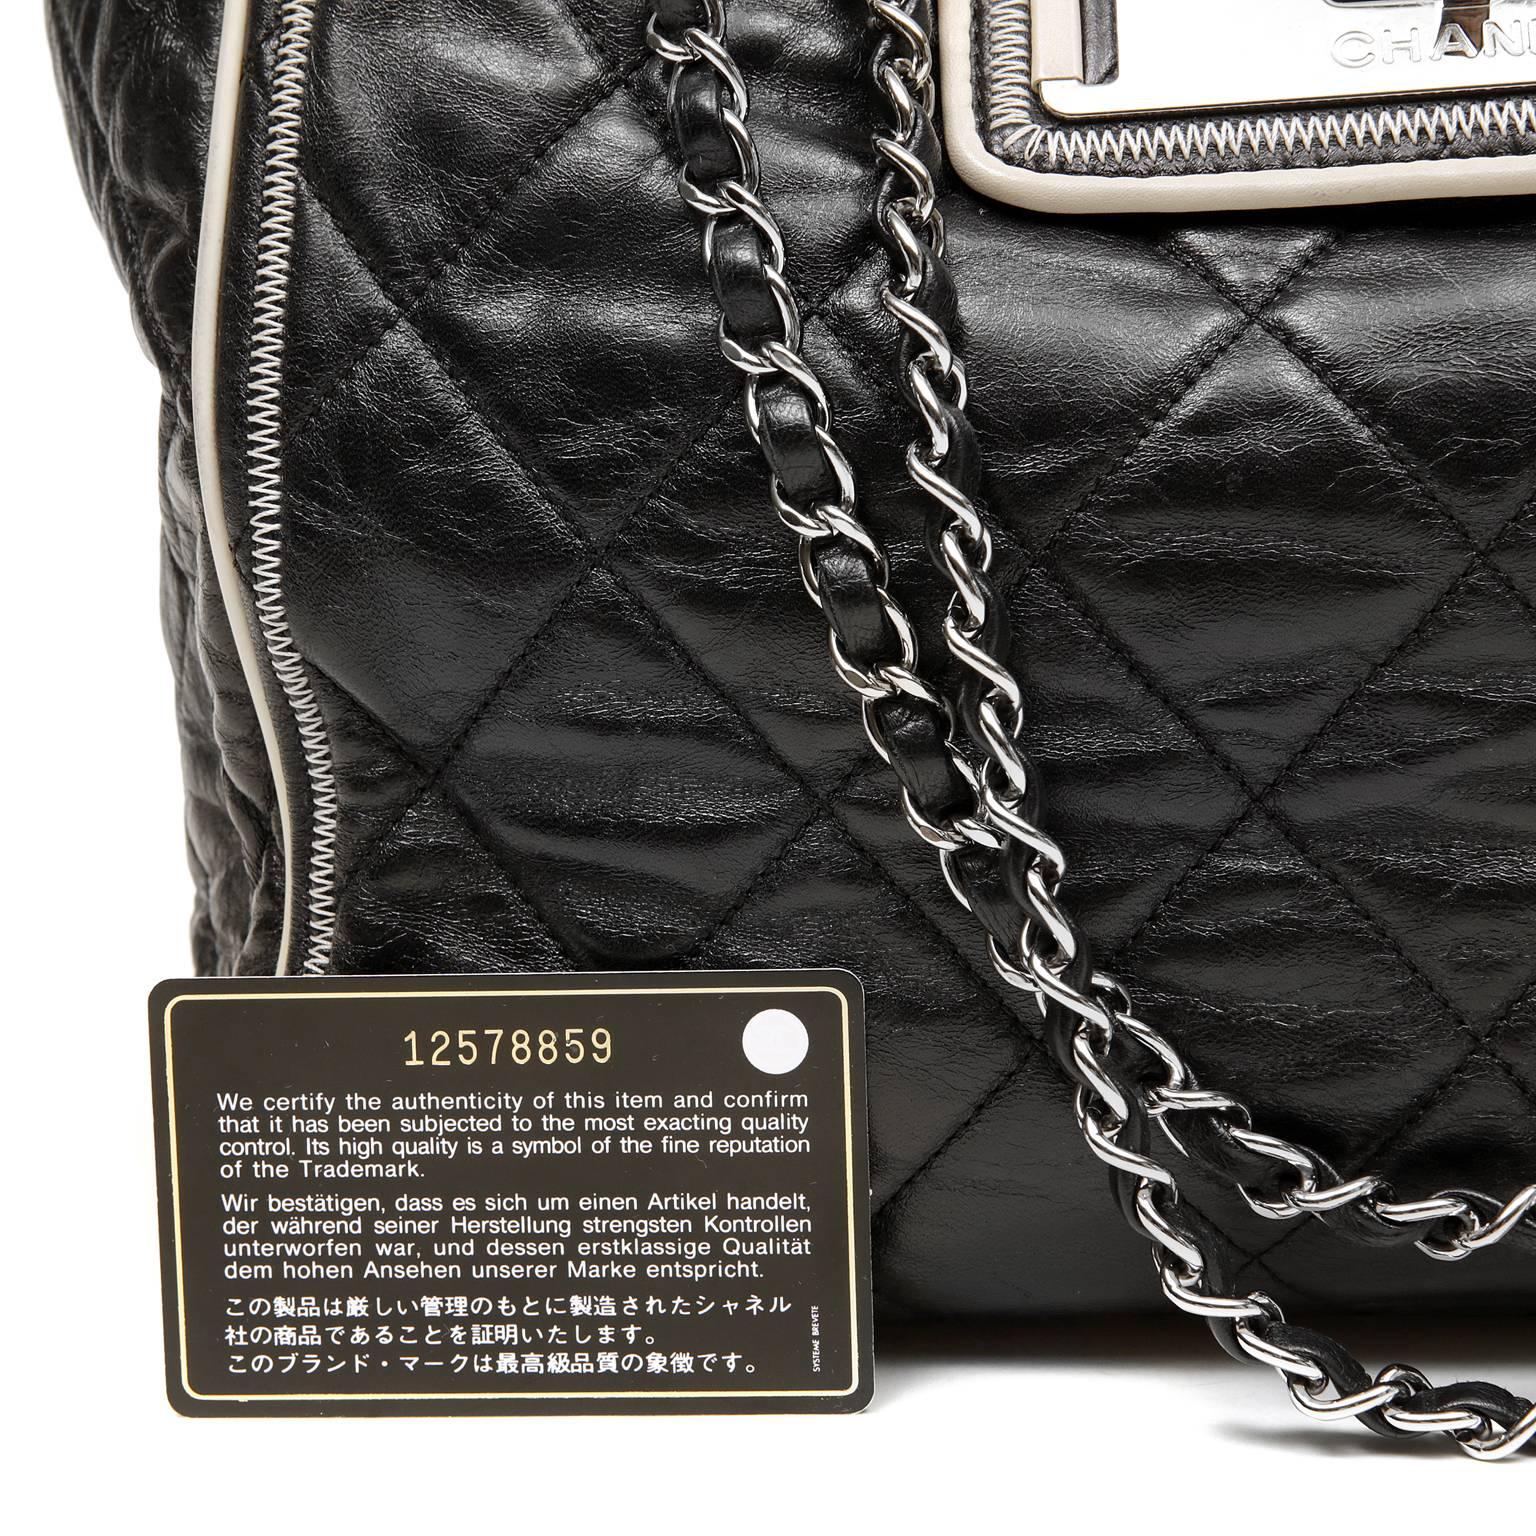 Chanel Black Leather Mademoiselle Flap Tote Bag 6